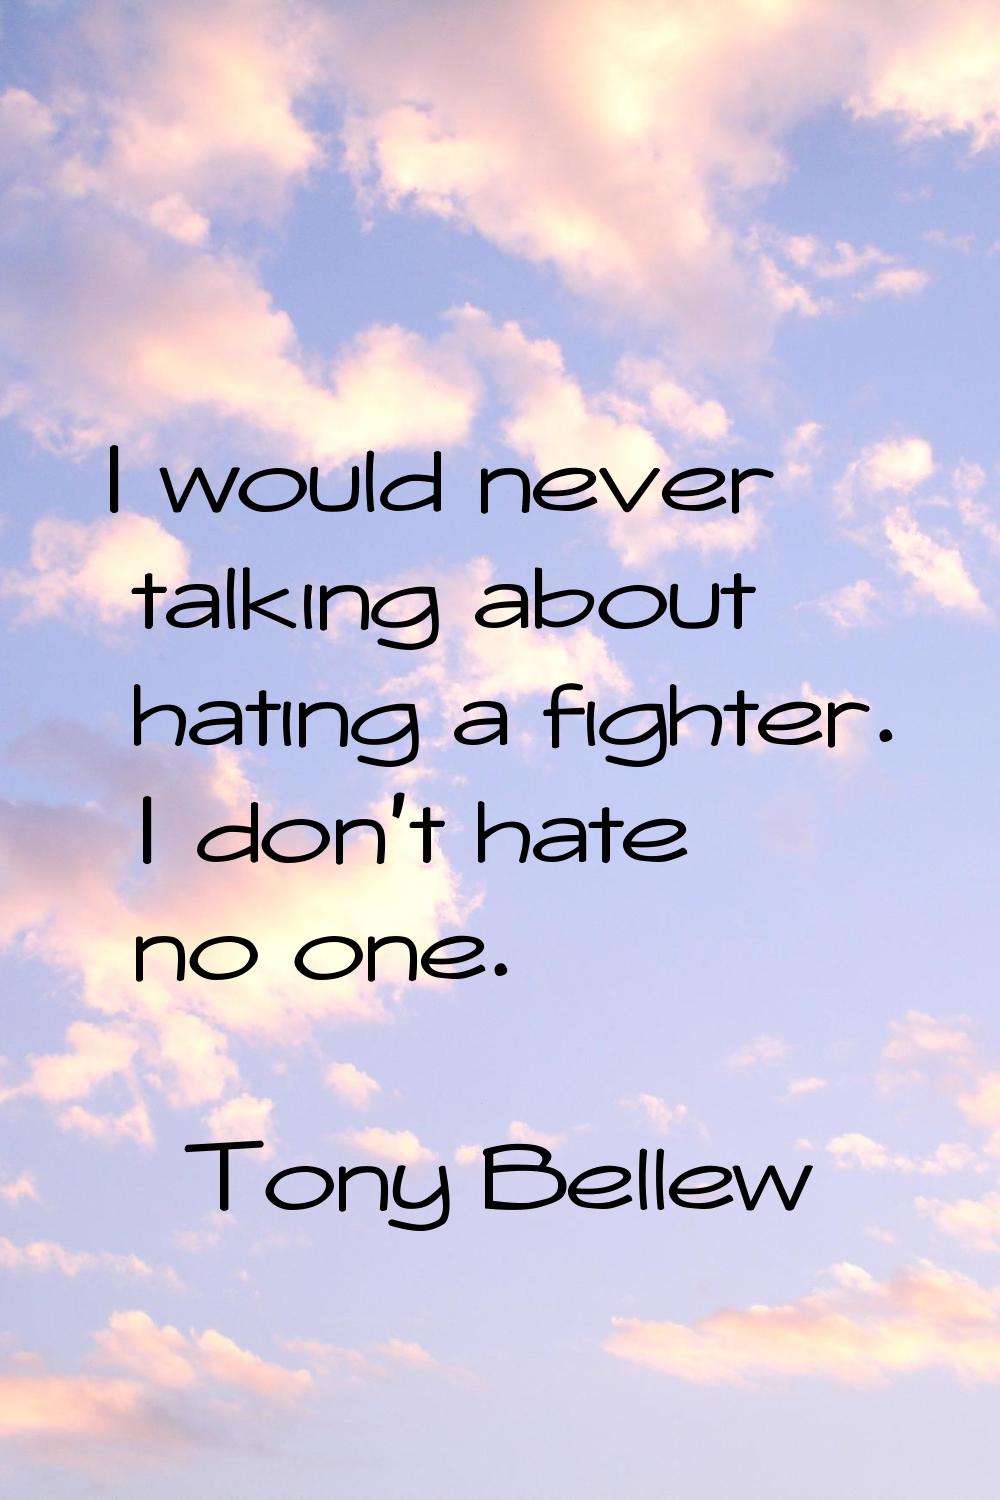 I would never talking about hating a fighter. I don't hate no one.